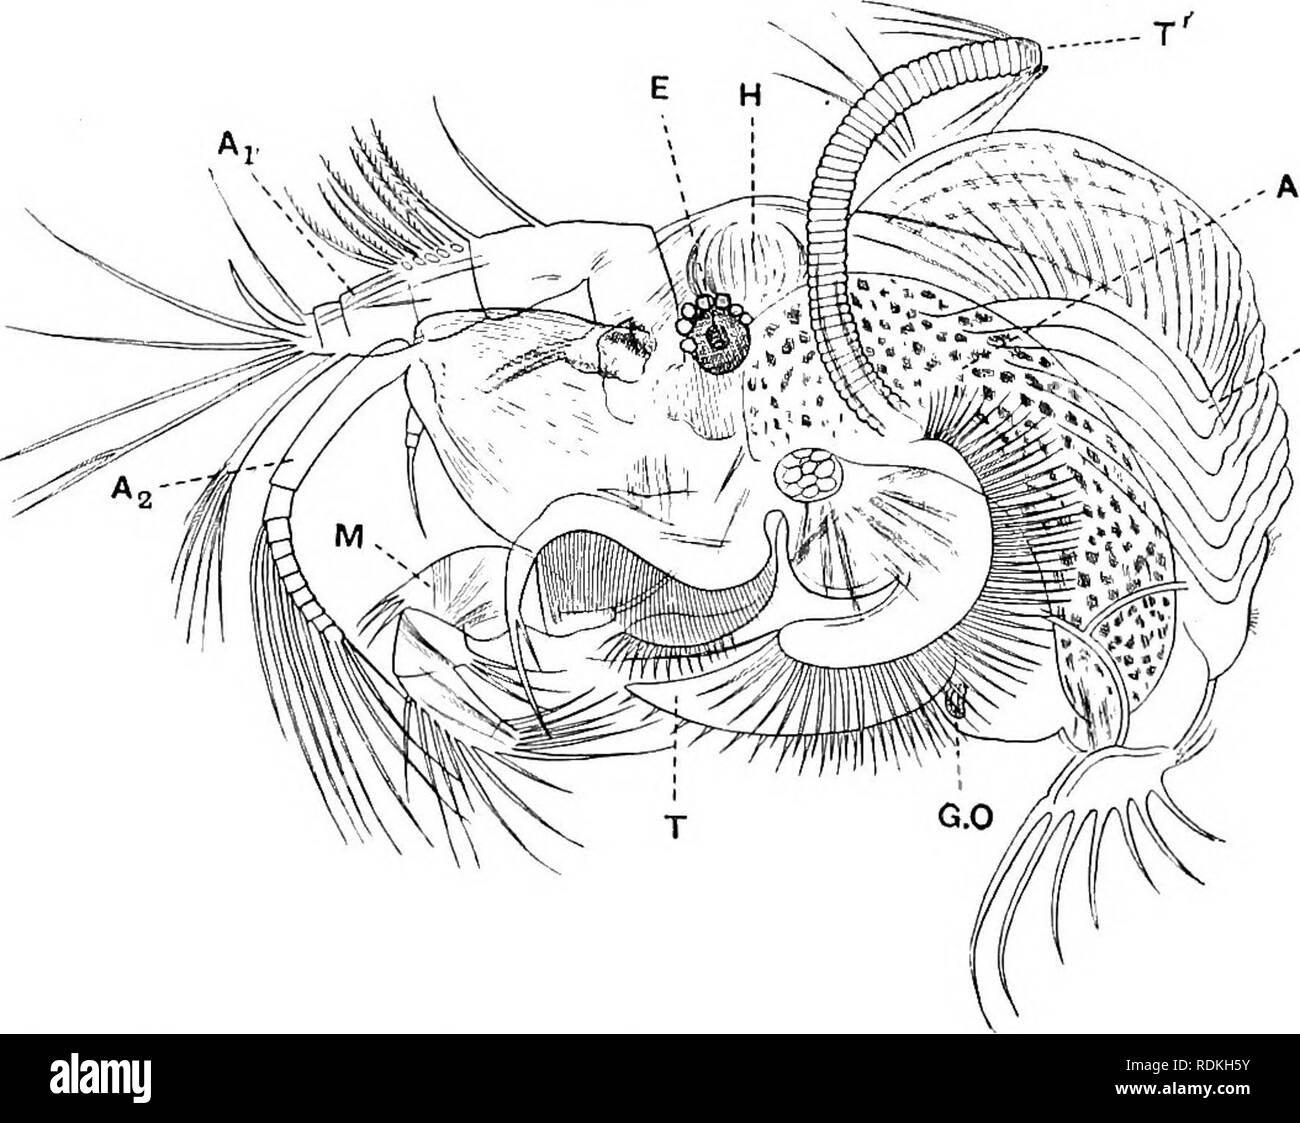 . The Cambridge natural history. Zoology. io8 CRUSTACEA OSTRACODA being pediform and used in walking. The telson in the Cytlieridae is rudimentary, but is well developed in the Cypridae. The heart is altogether absent. In many of the fresh-water forms, e.g. eonmion species of Candona and Cypris, niales are never found, and parthenogenetic reproduction by the females appears to proceed uninterruptedly. Weismann ^ kept females of Cypris reptans breeding partheno- genetically for eight years. He also remarks on the fact that these, and indeed all parthenogenetic female Ostracoda, retain the recep Stock Photo